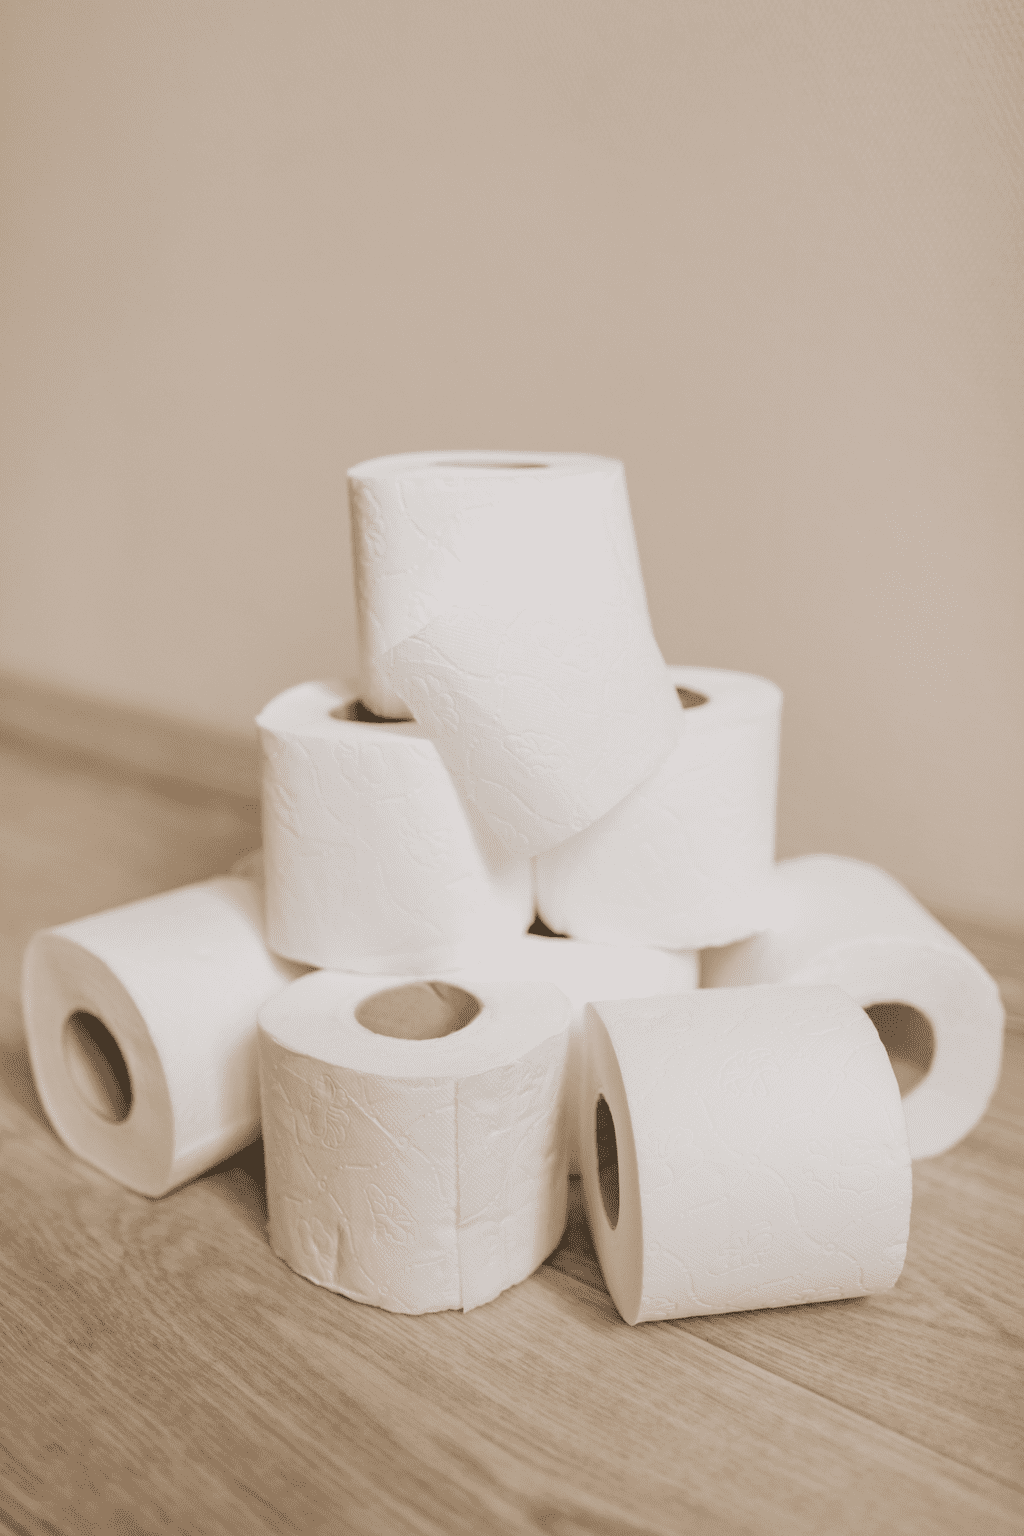 Excessive toilet paper use is a common reason for toilet clogs